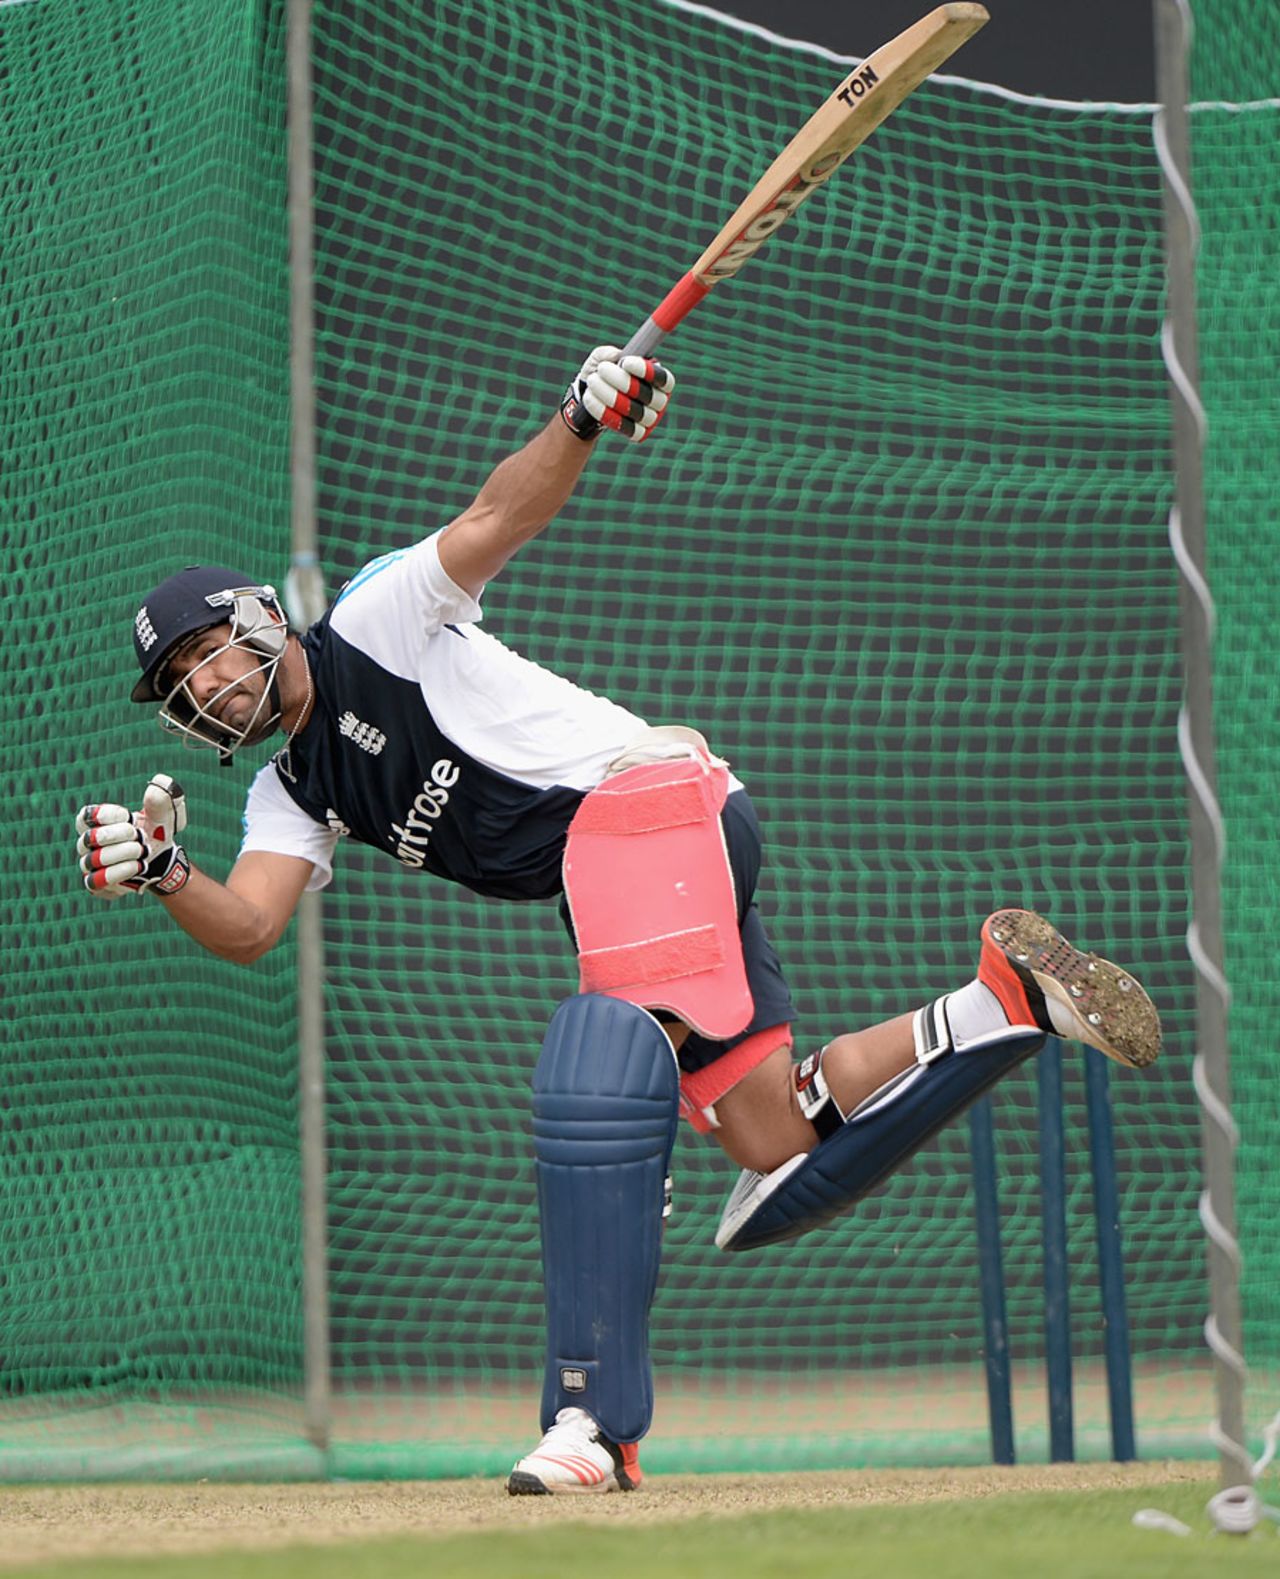 Ravi Bopara tries something extravagant in the nets, Colombo, November 24, 2014